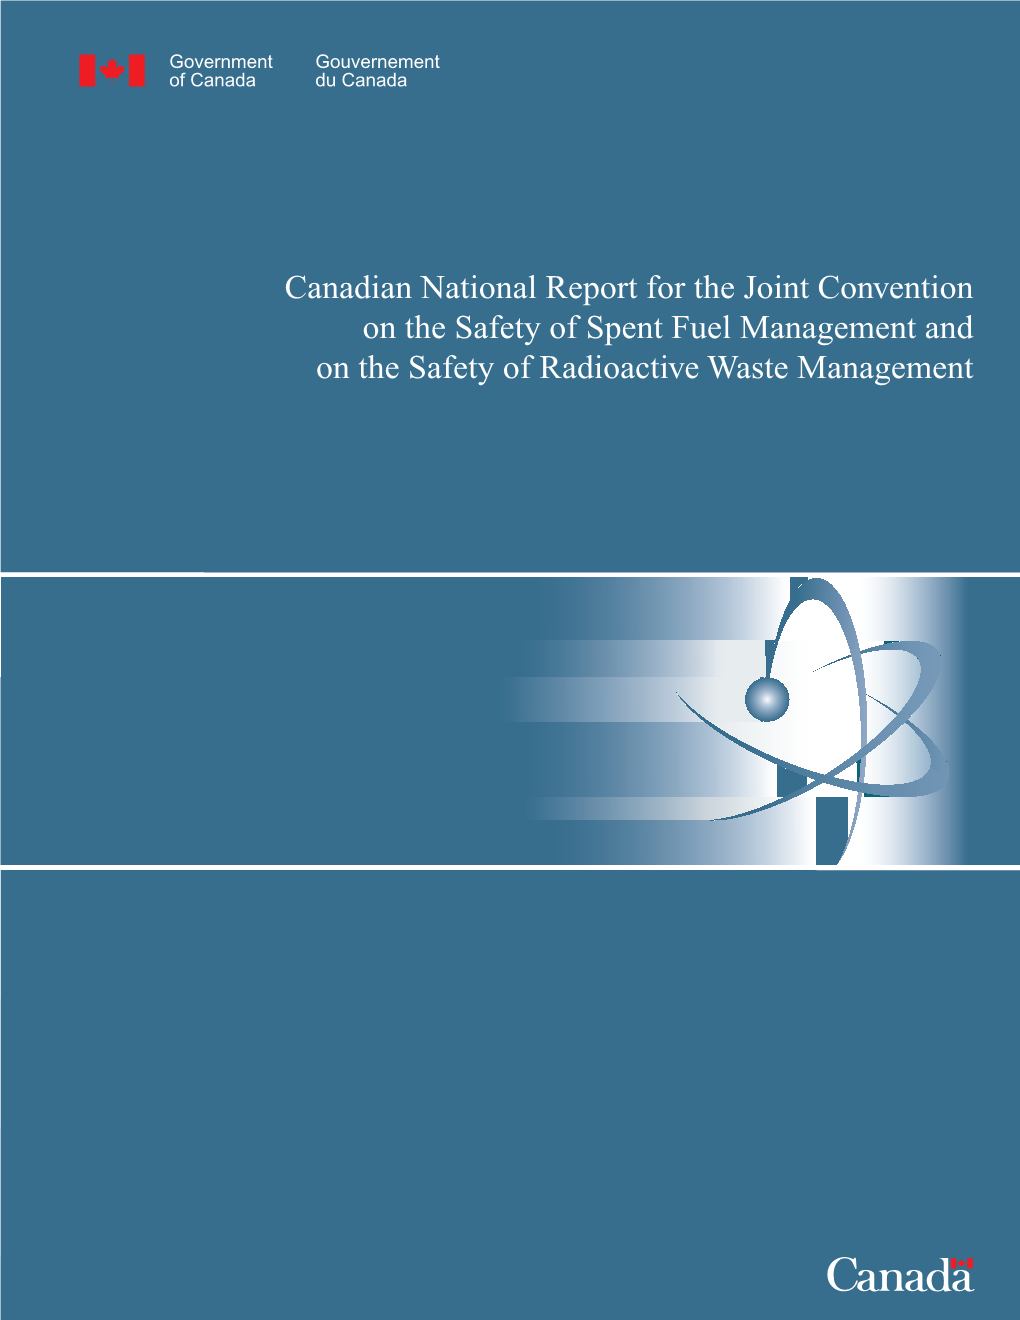 Canadian National Report for the Joint Convention on the Safety of Spent